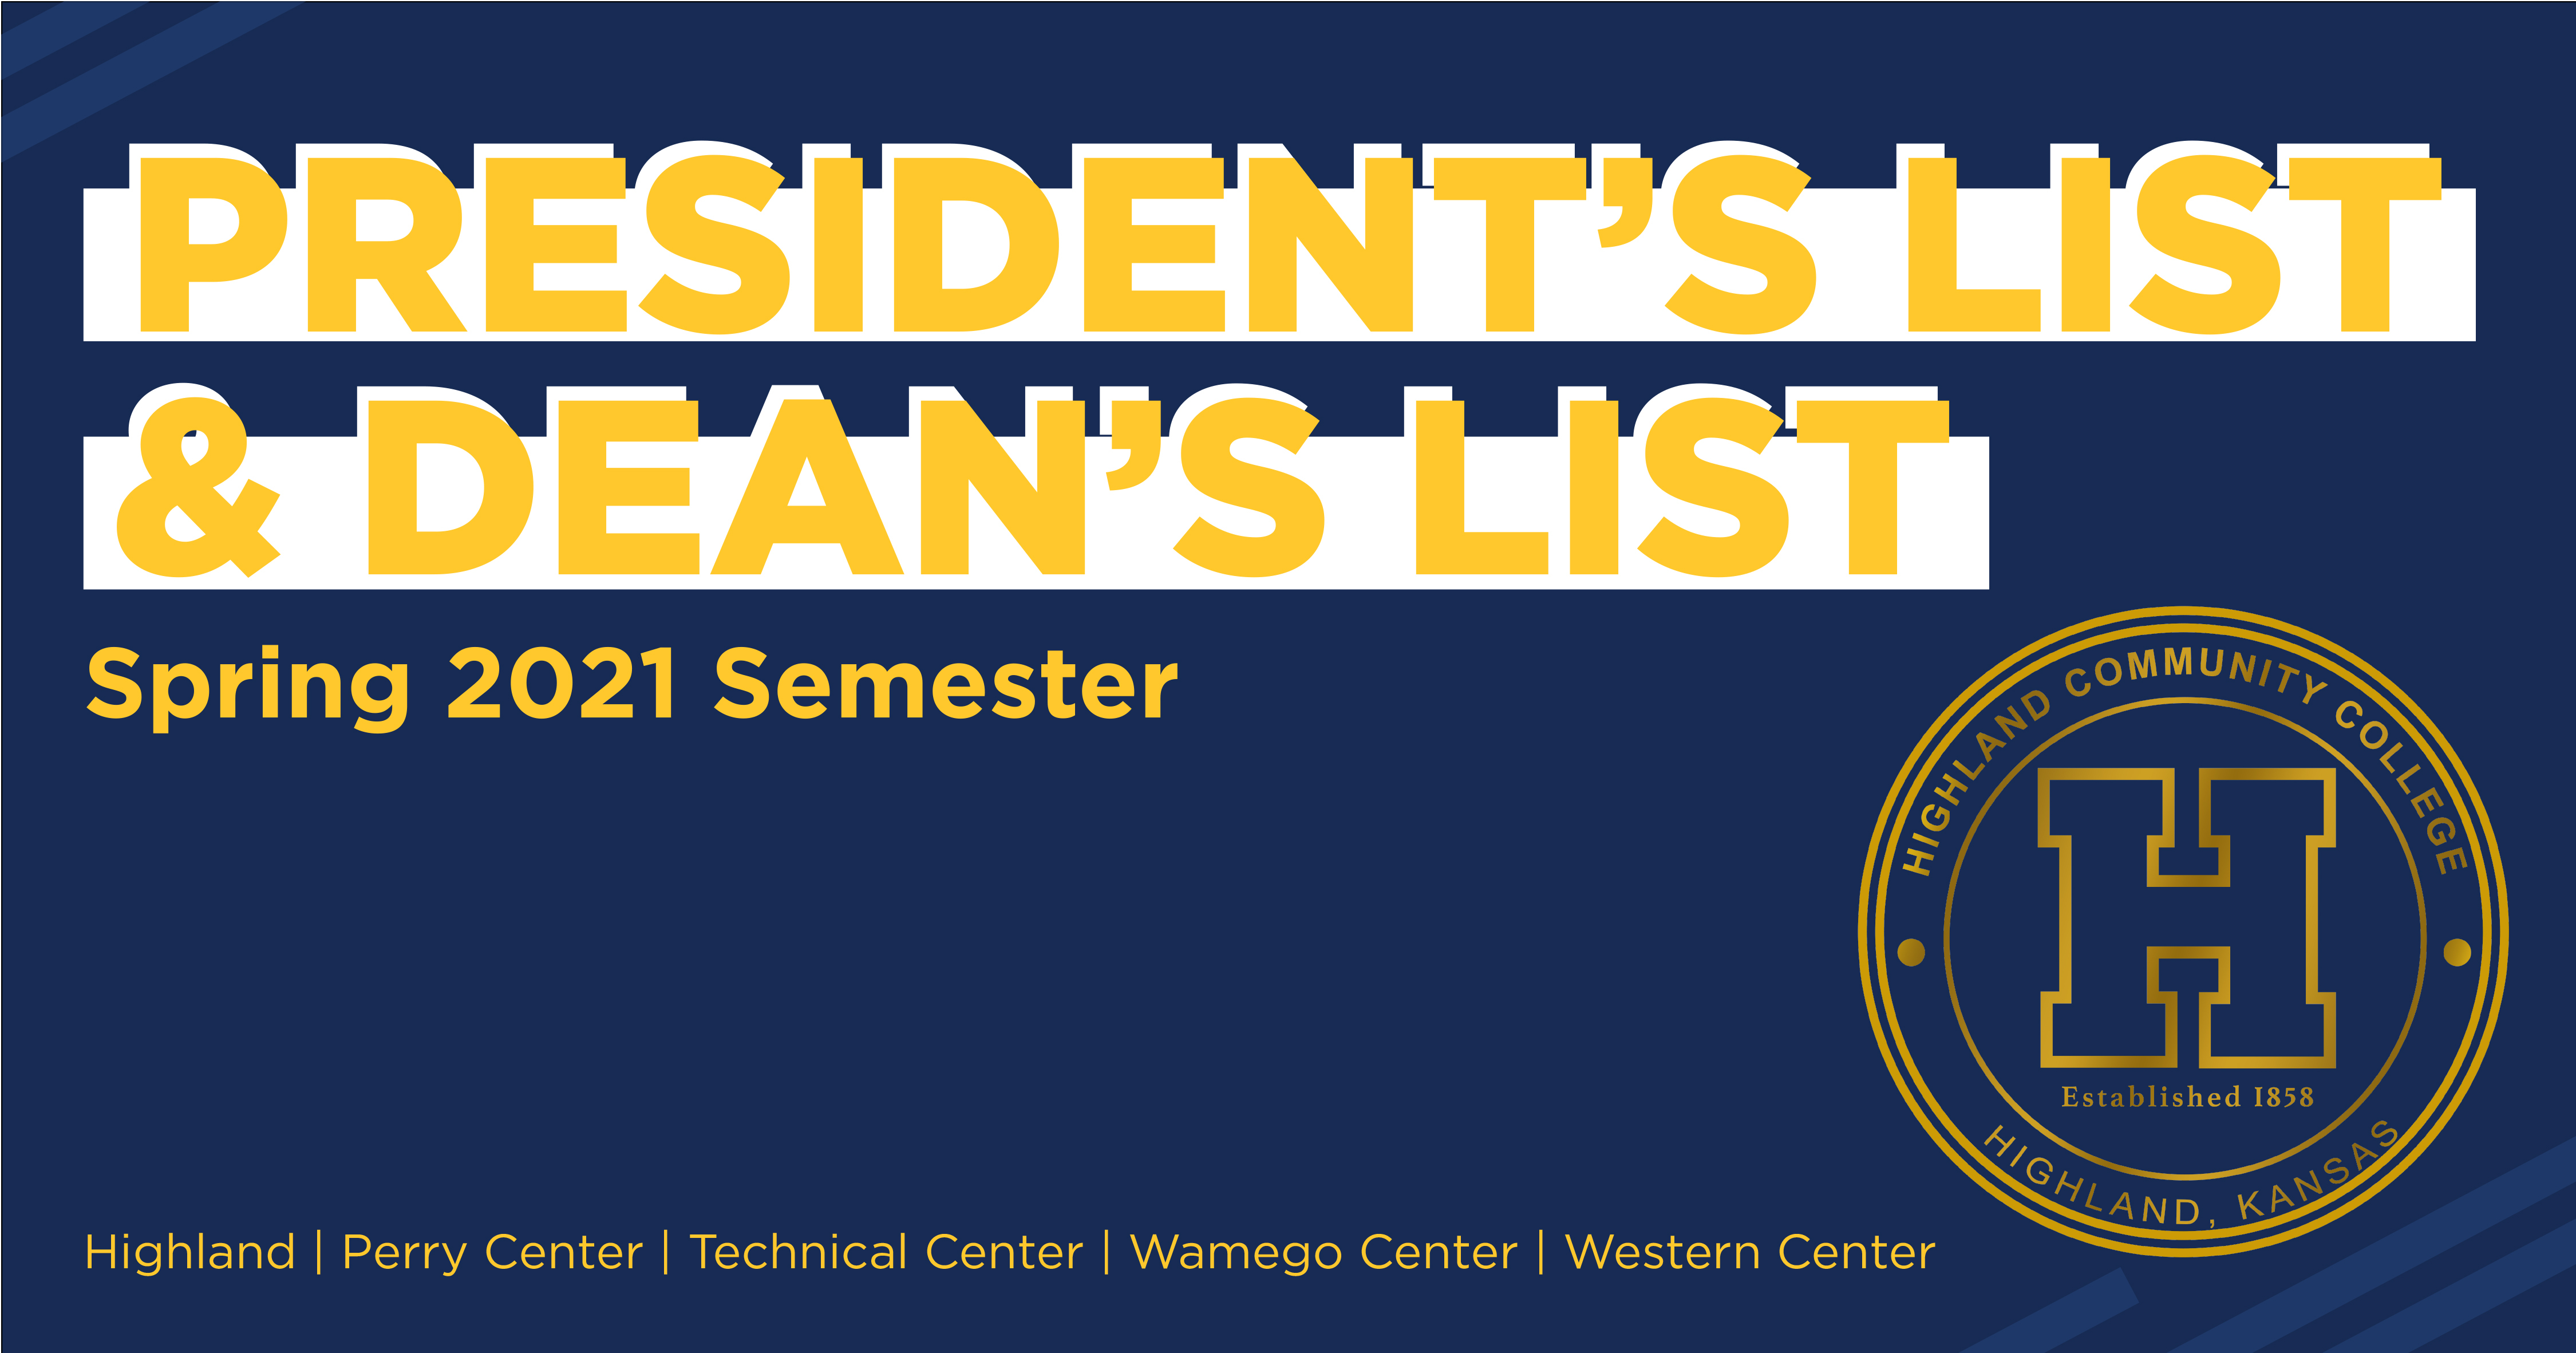 President's and Dean's list Spring 2021